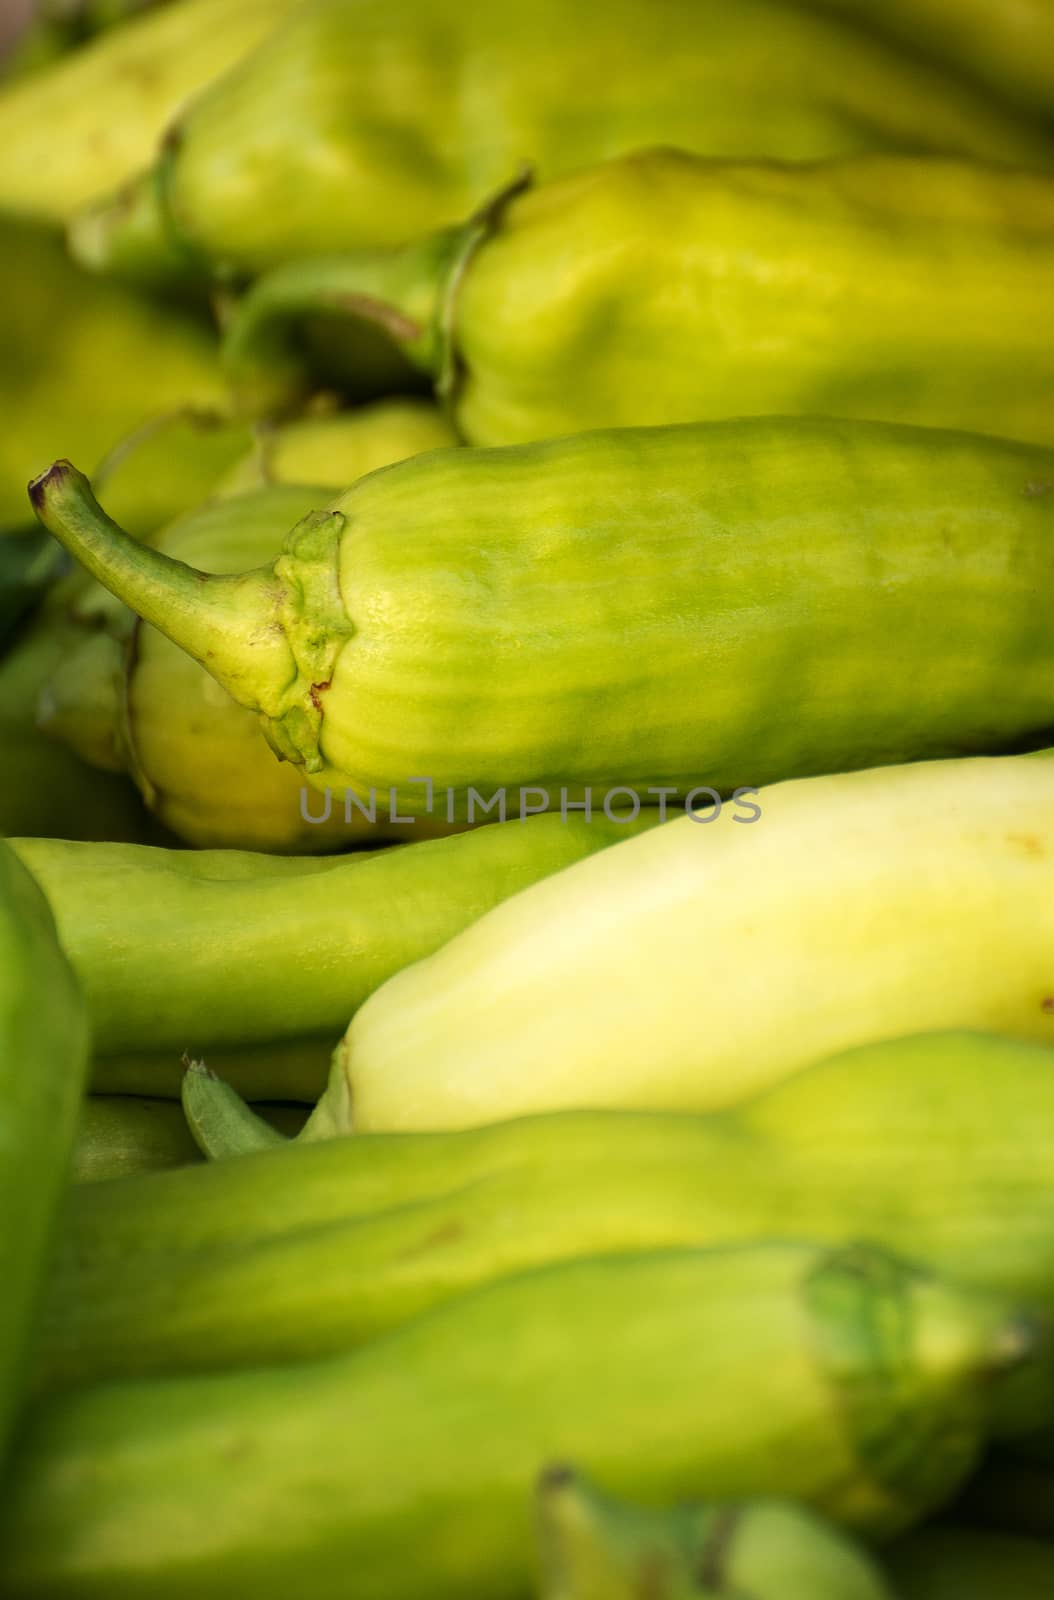 Green banana peppers on the market. by dmitrimaruta